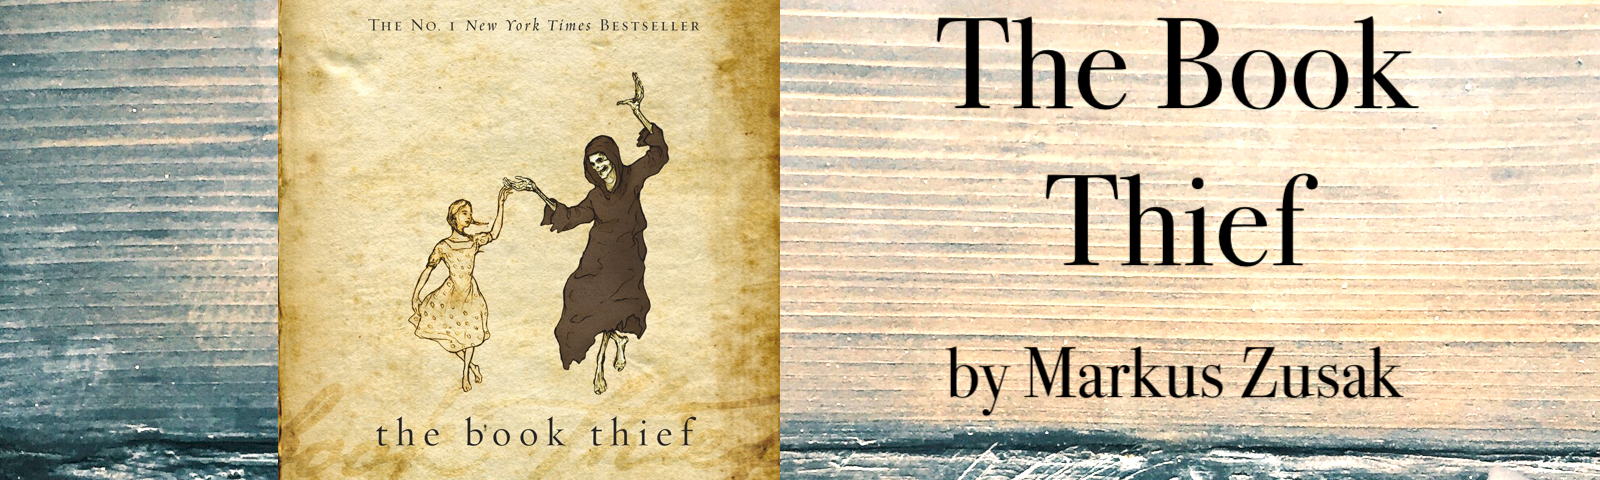 Eleventy-One Book Review of The Book Thief by Markus Zusak